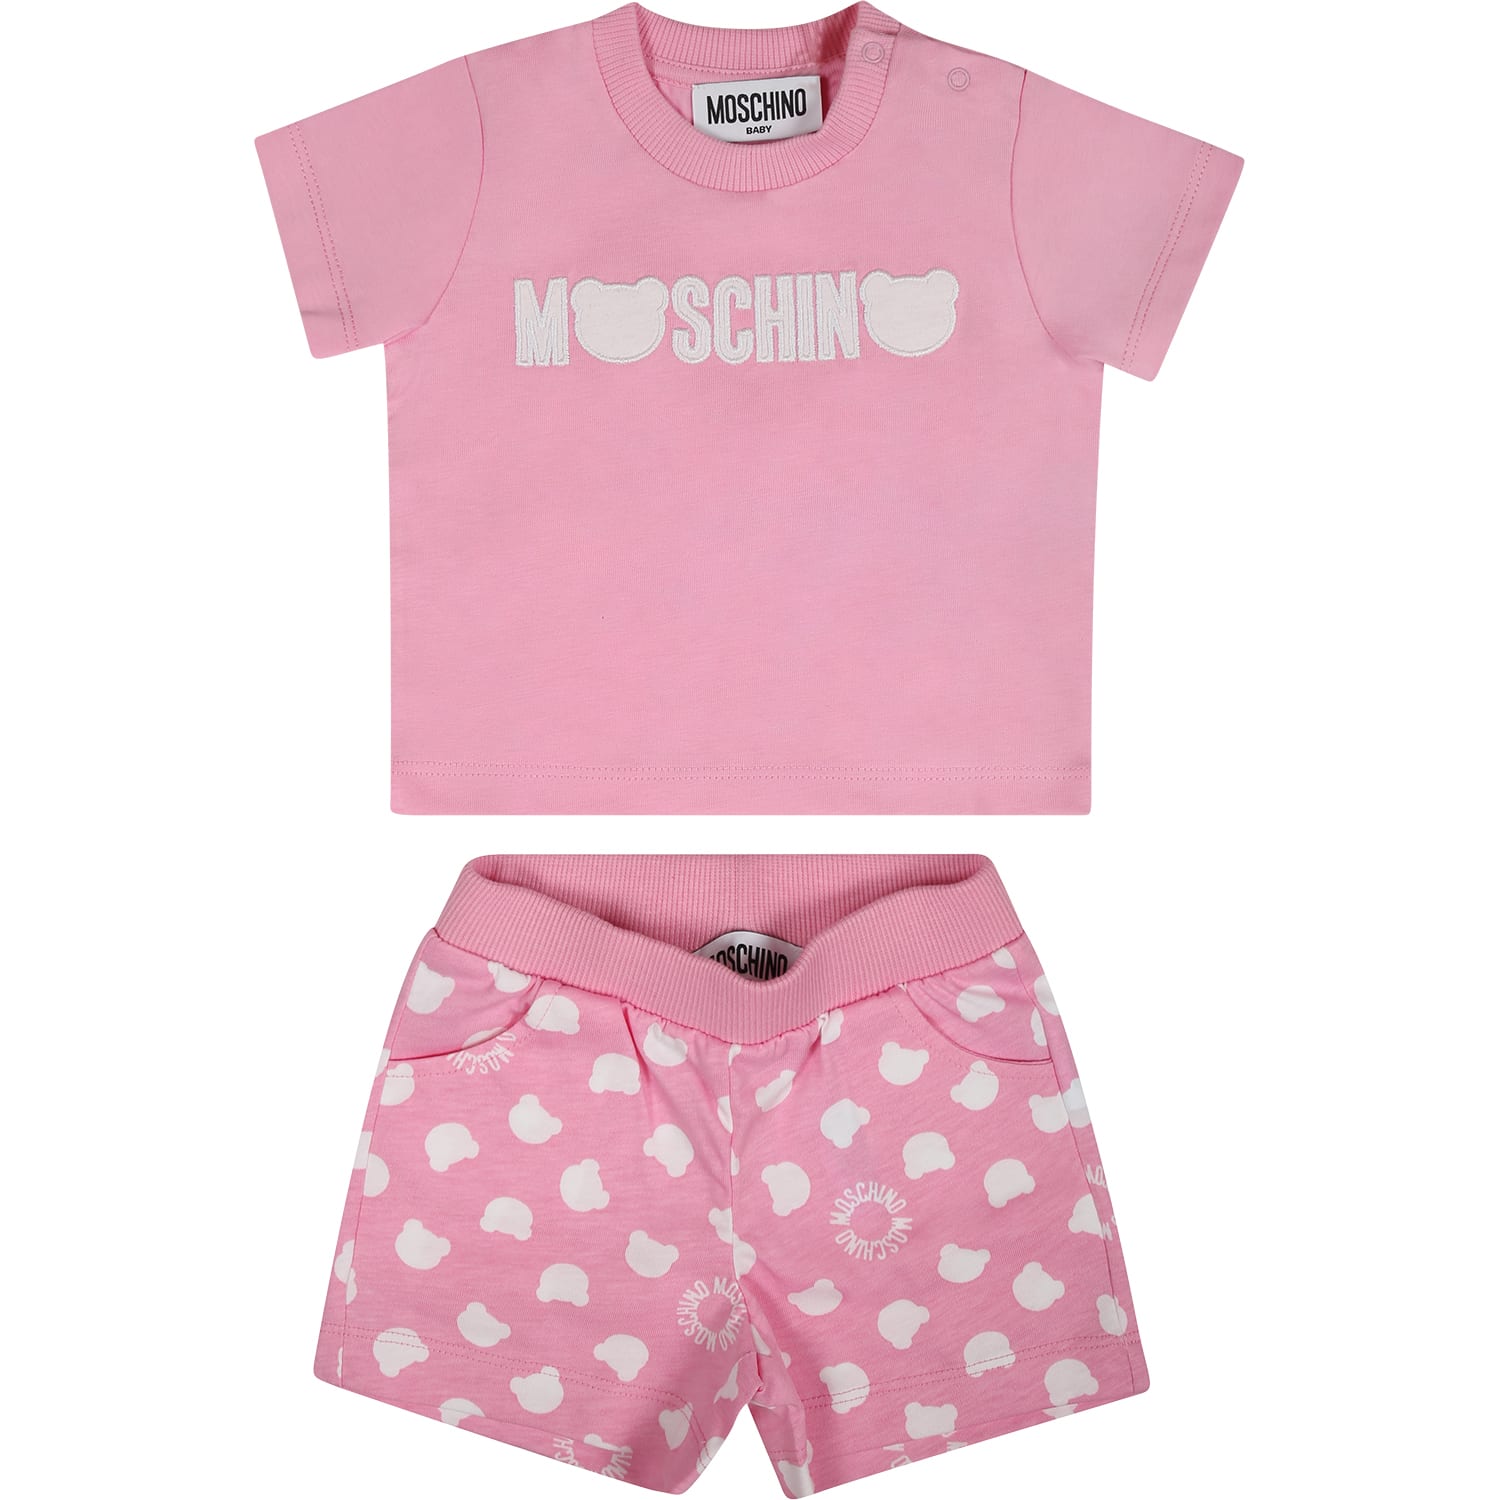 Moschino Pink Outfit For Baby Girl With Logo